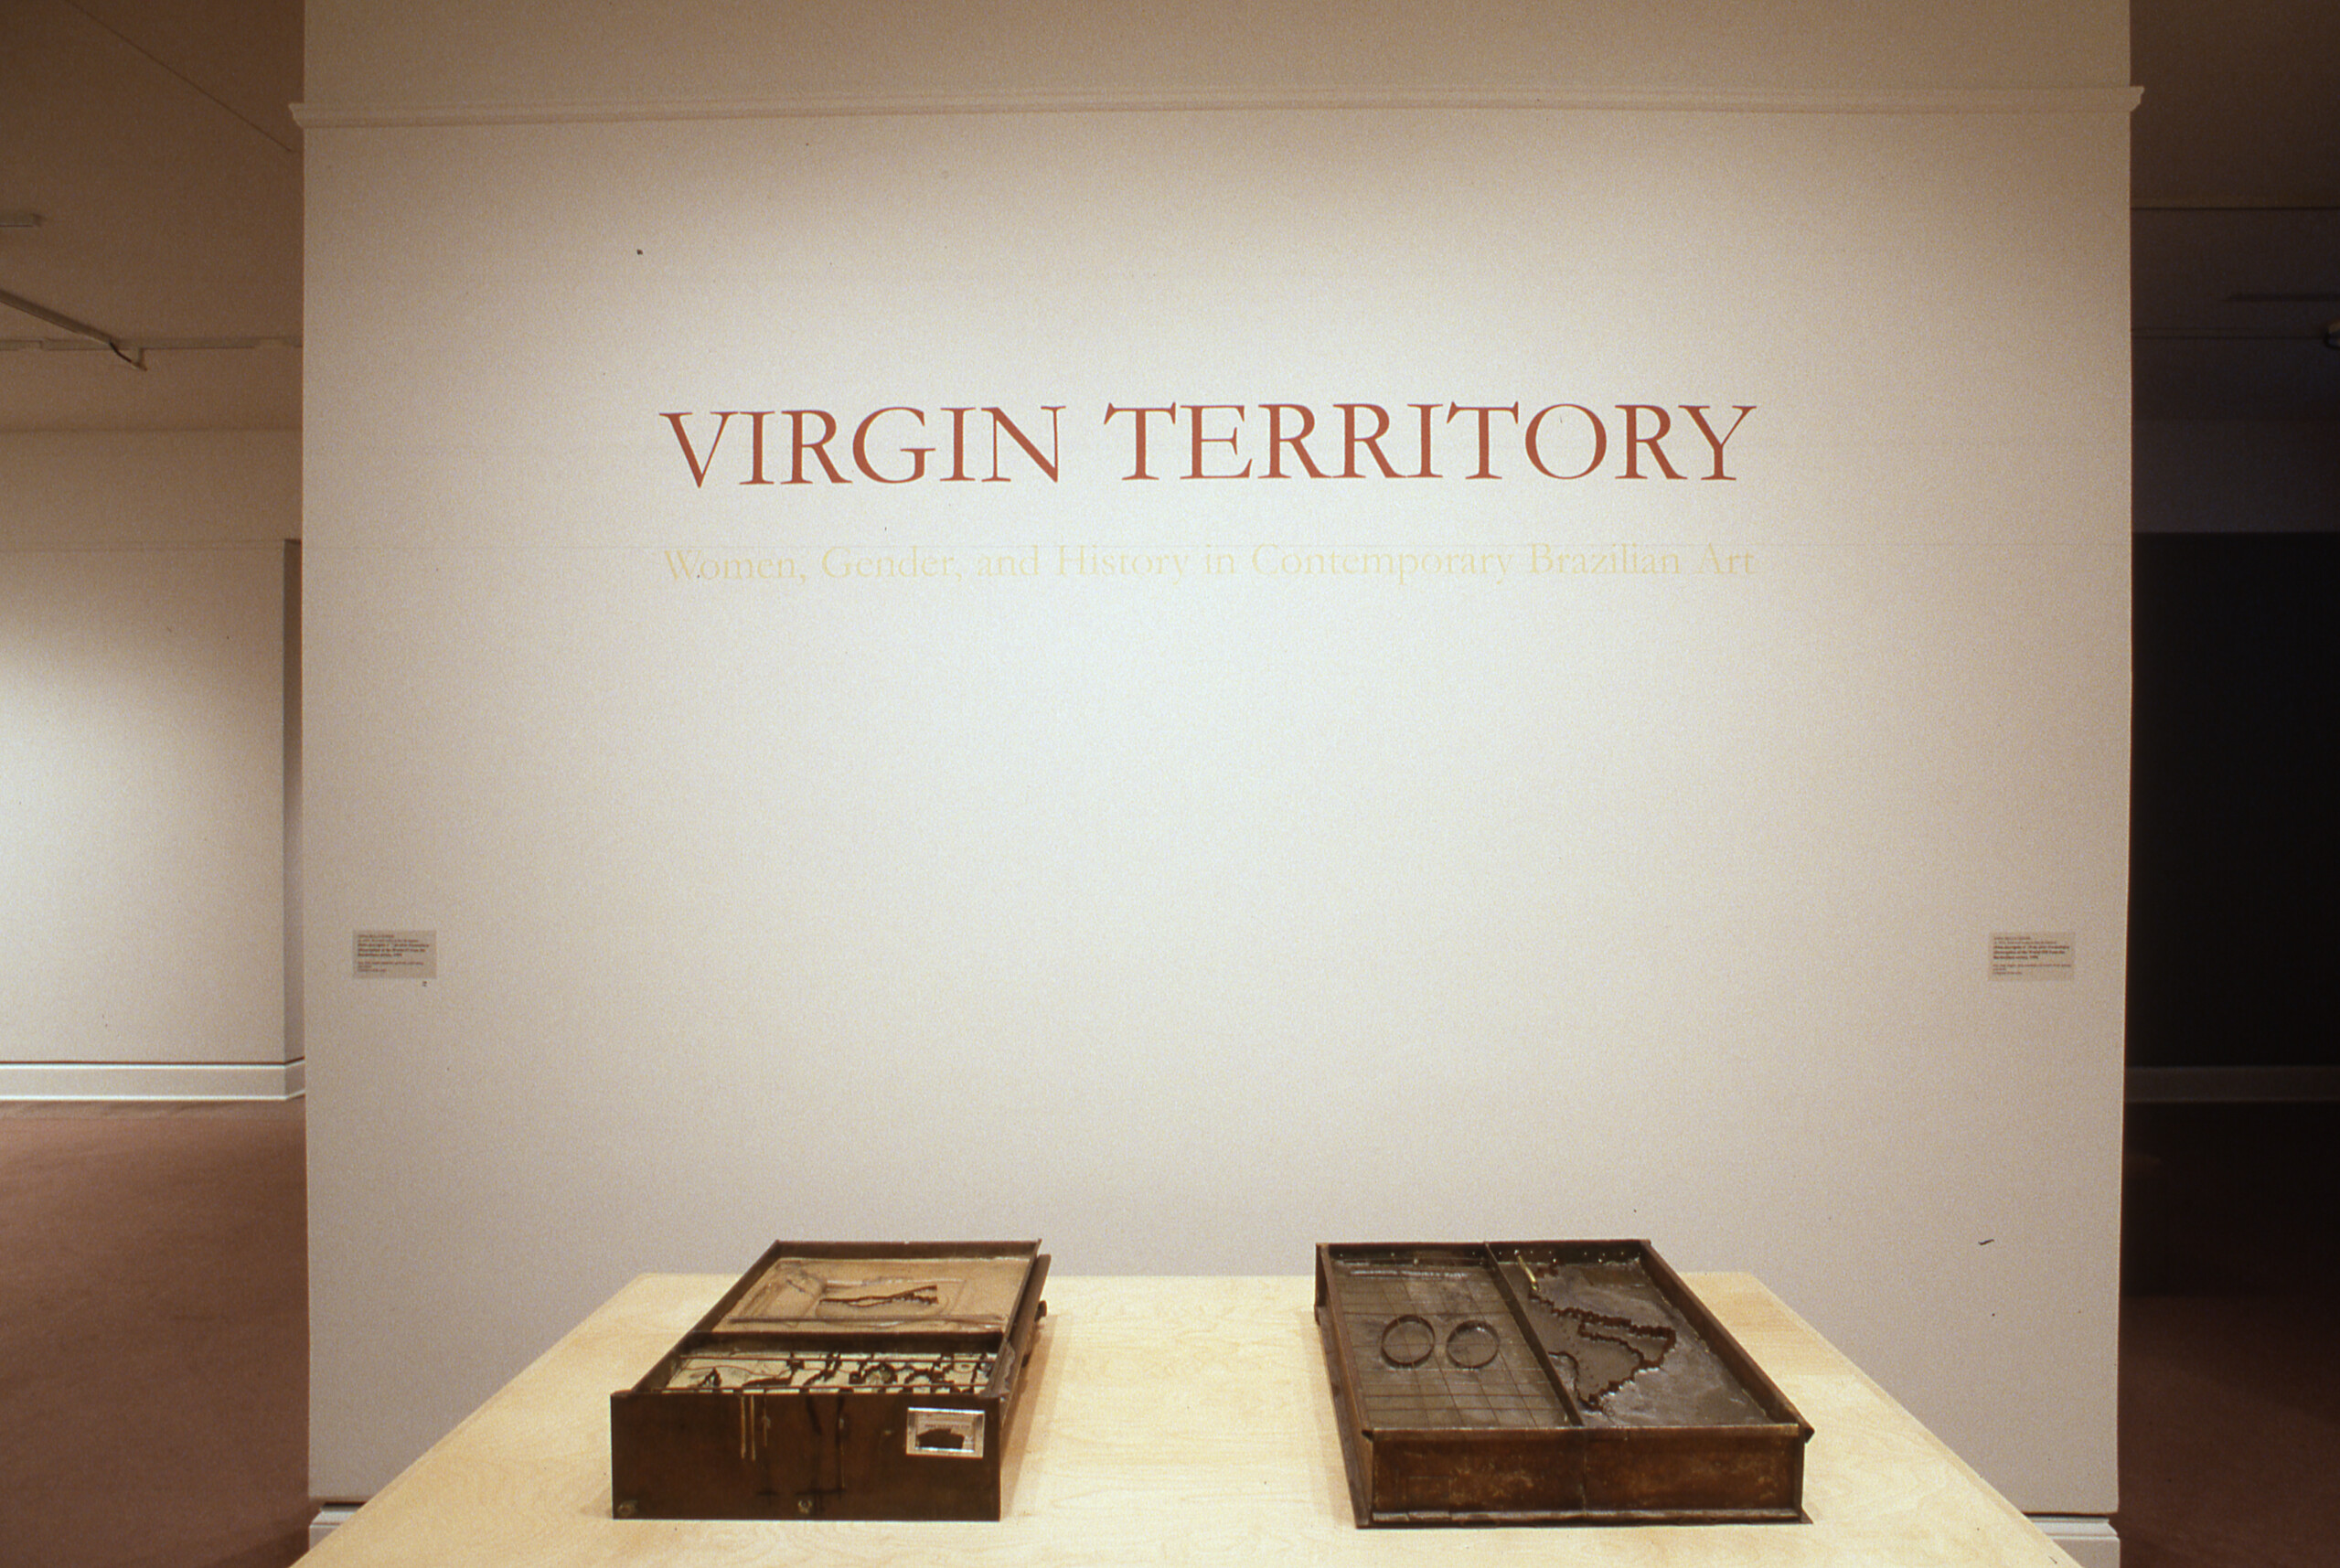 Installation view of an exhibition space. On a white wall, the text reads 